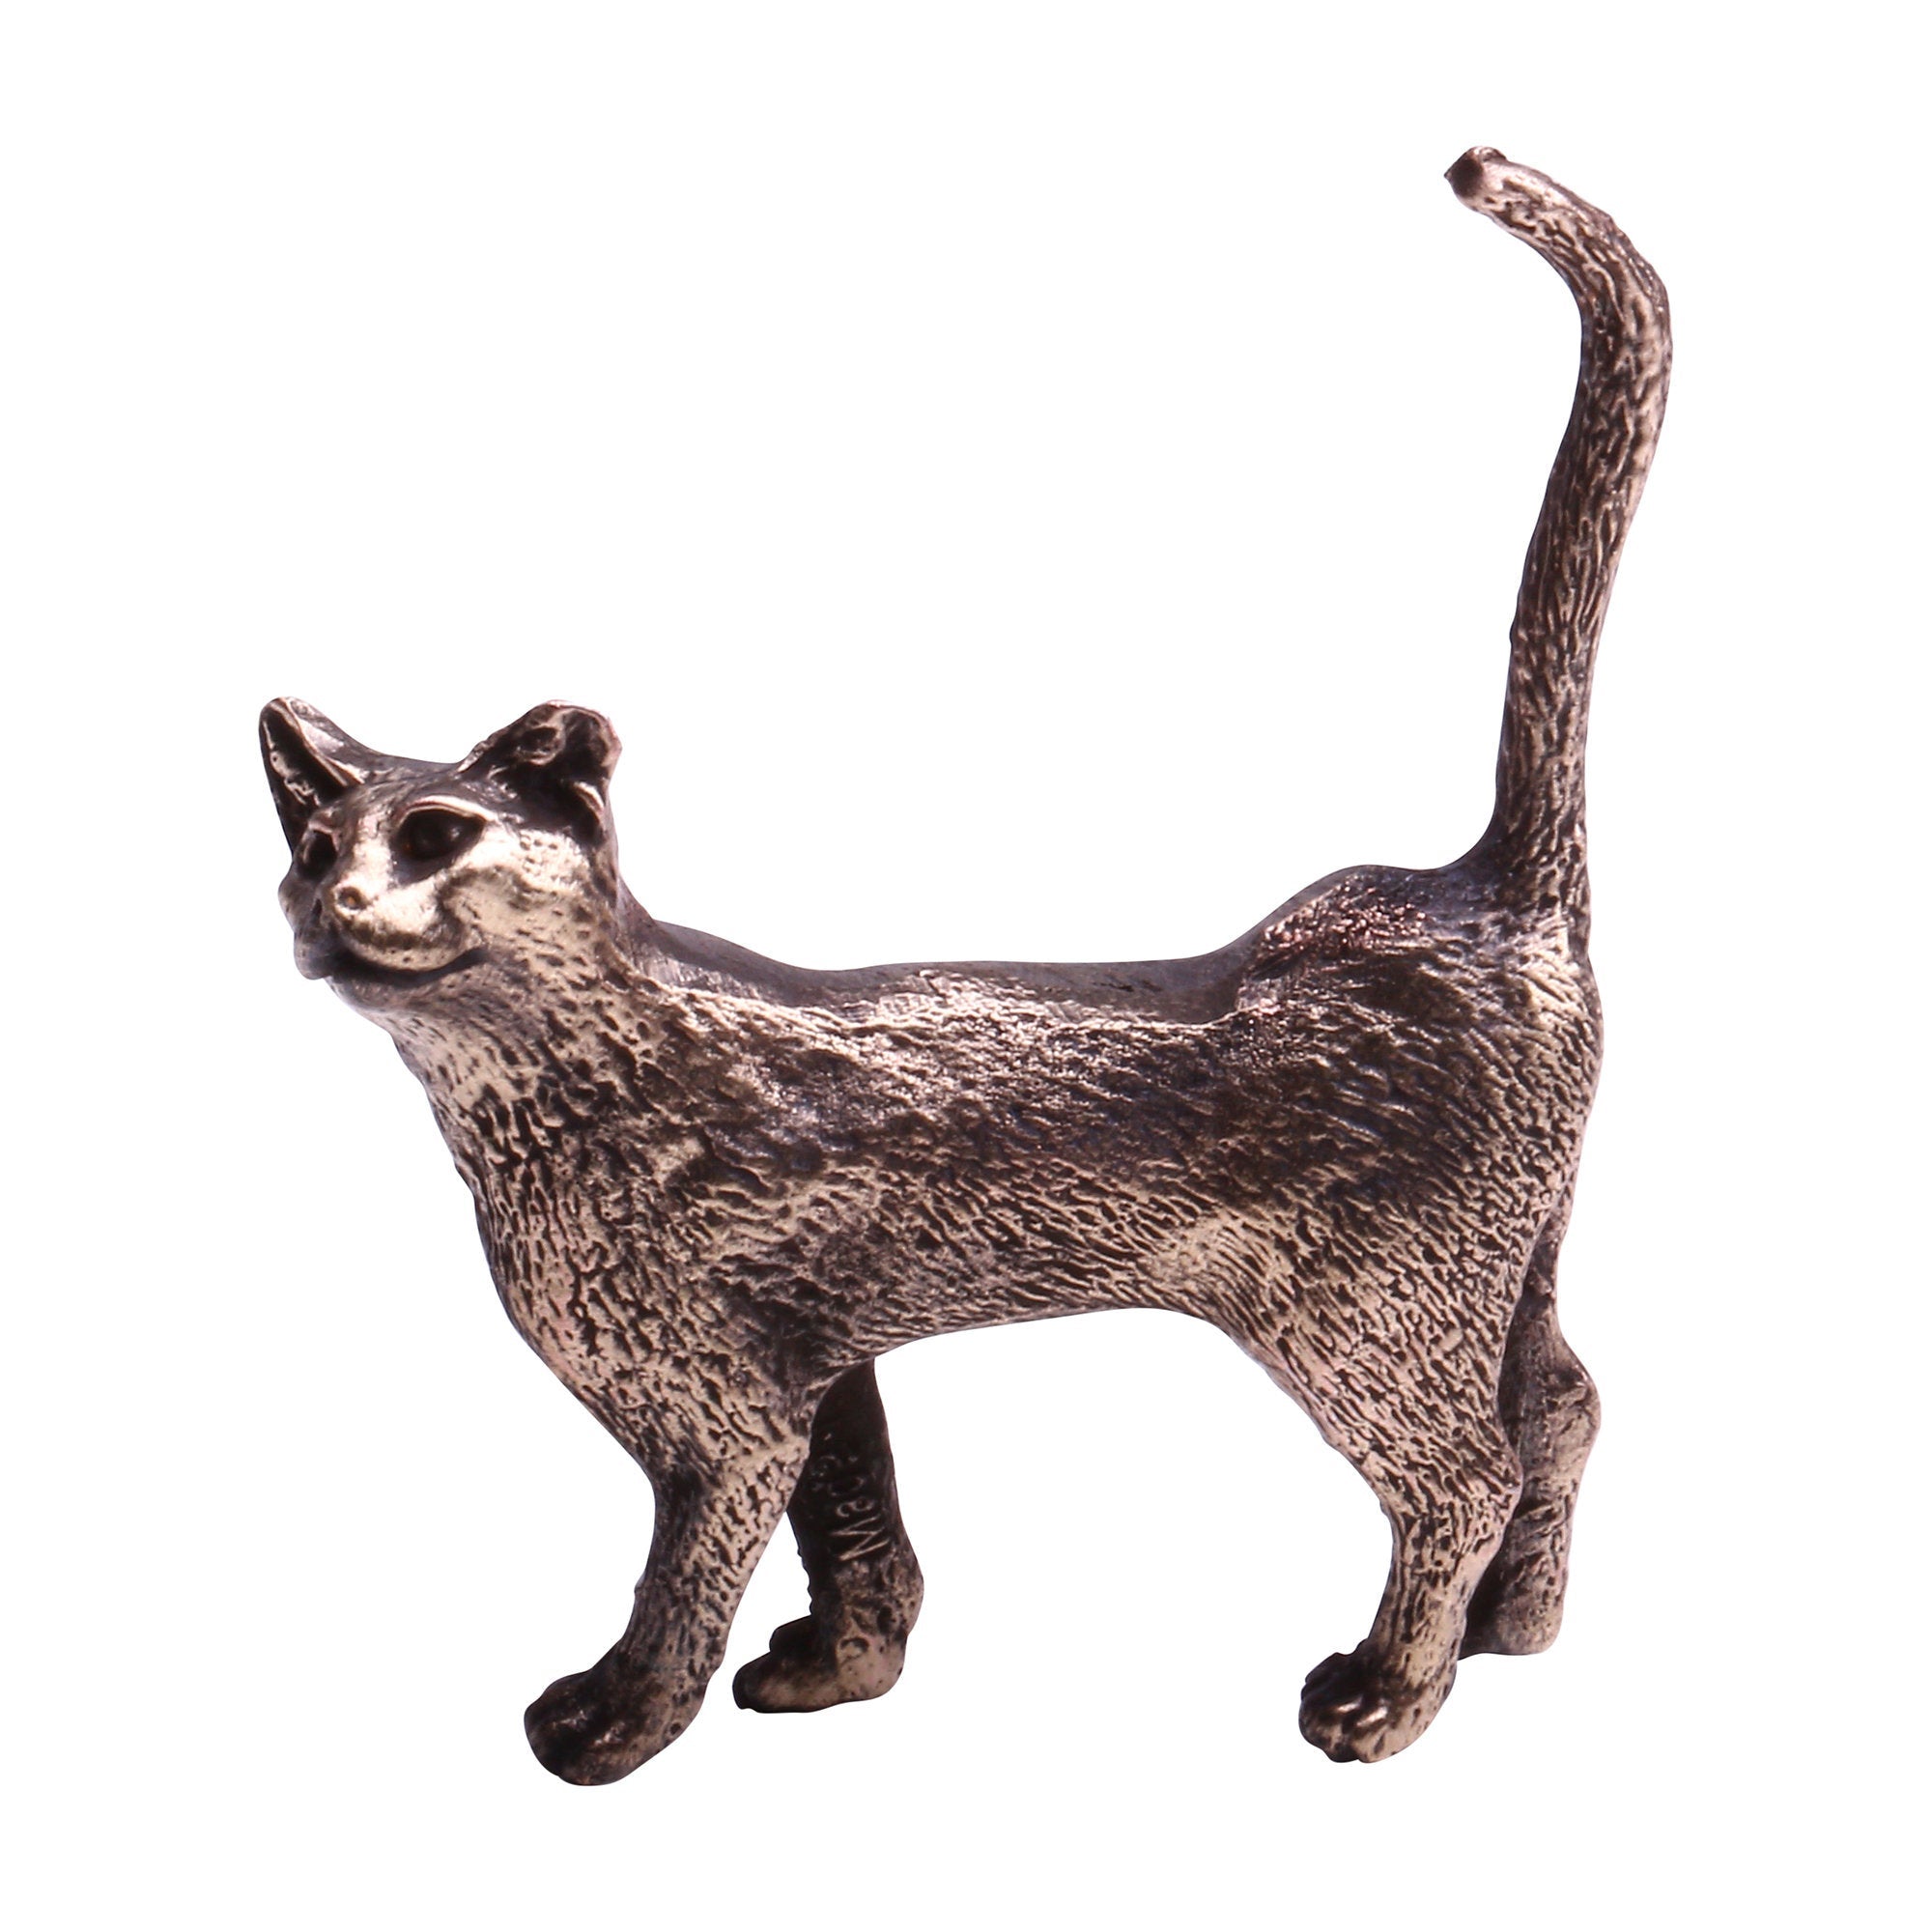 Chat Miniature Sculpture Figurine Collection Animaux Art Reproduction By Mode France